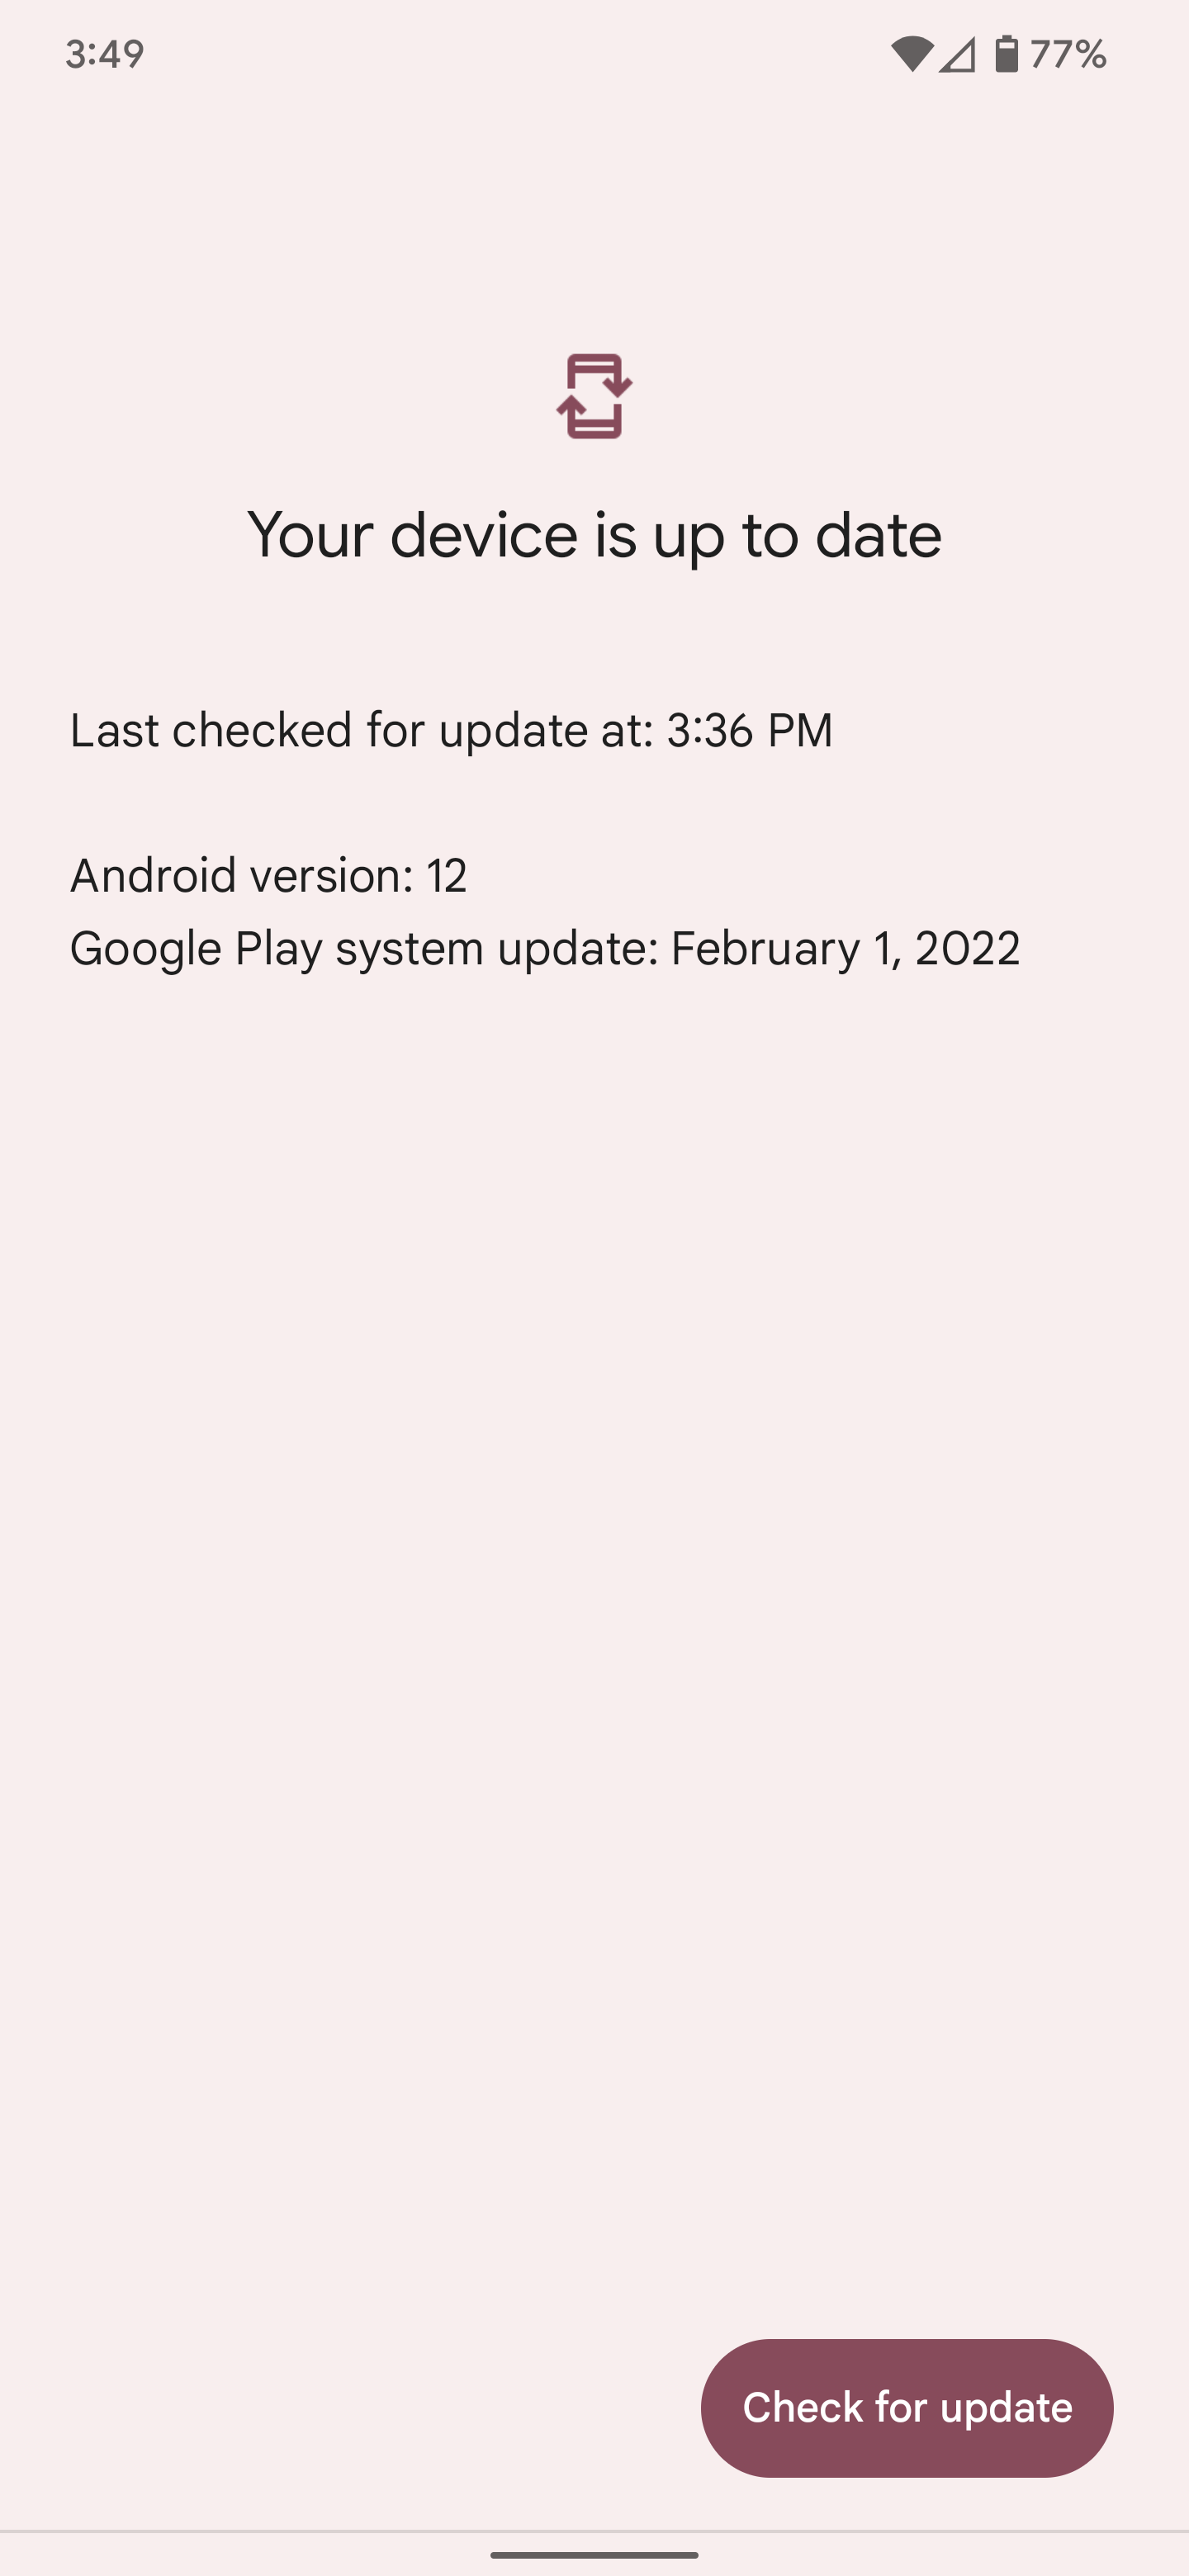 Google Play system updates July Game dash, more 9to5Google